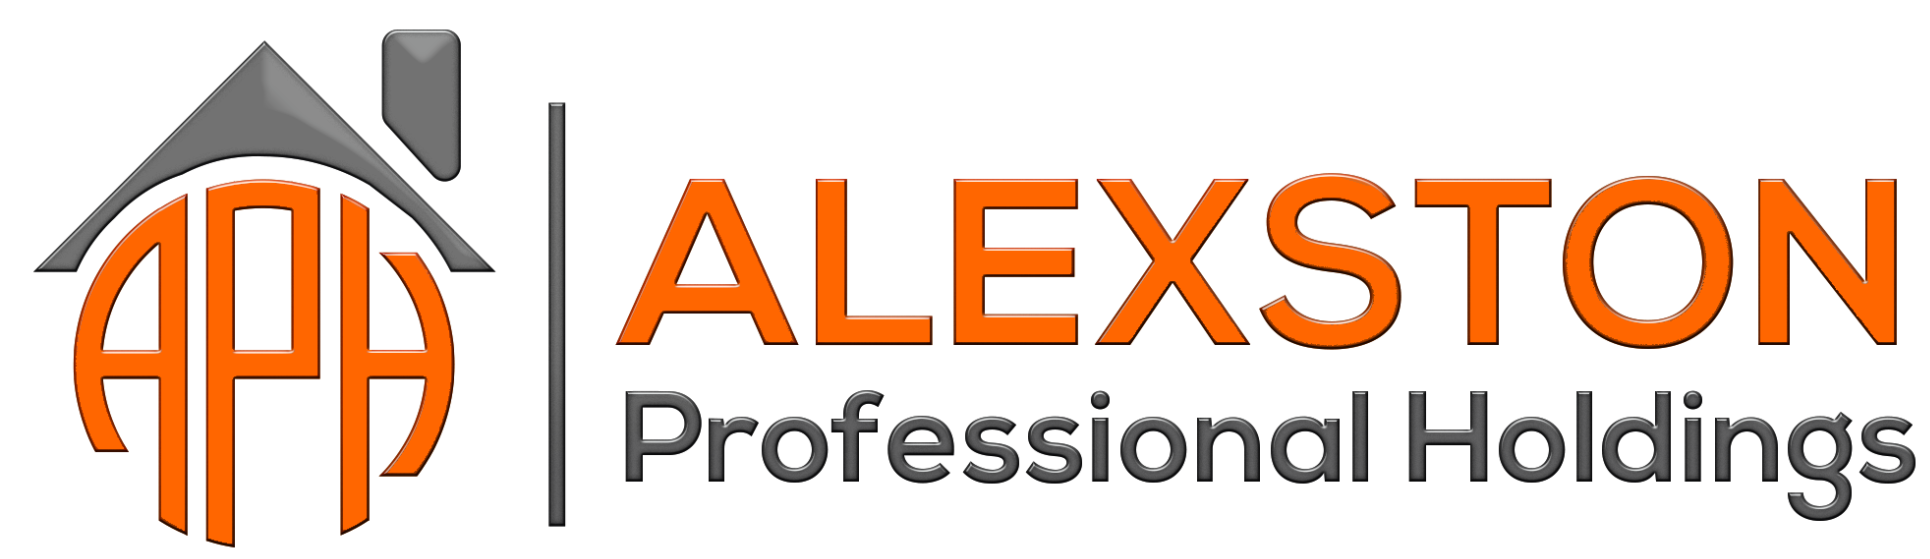 Alexston Professional Holdings-Keeping Real Estate Simple!!!